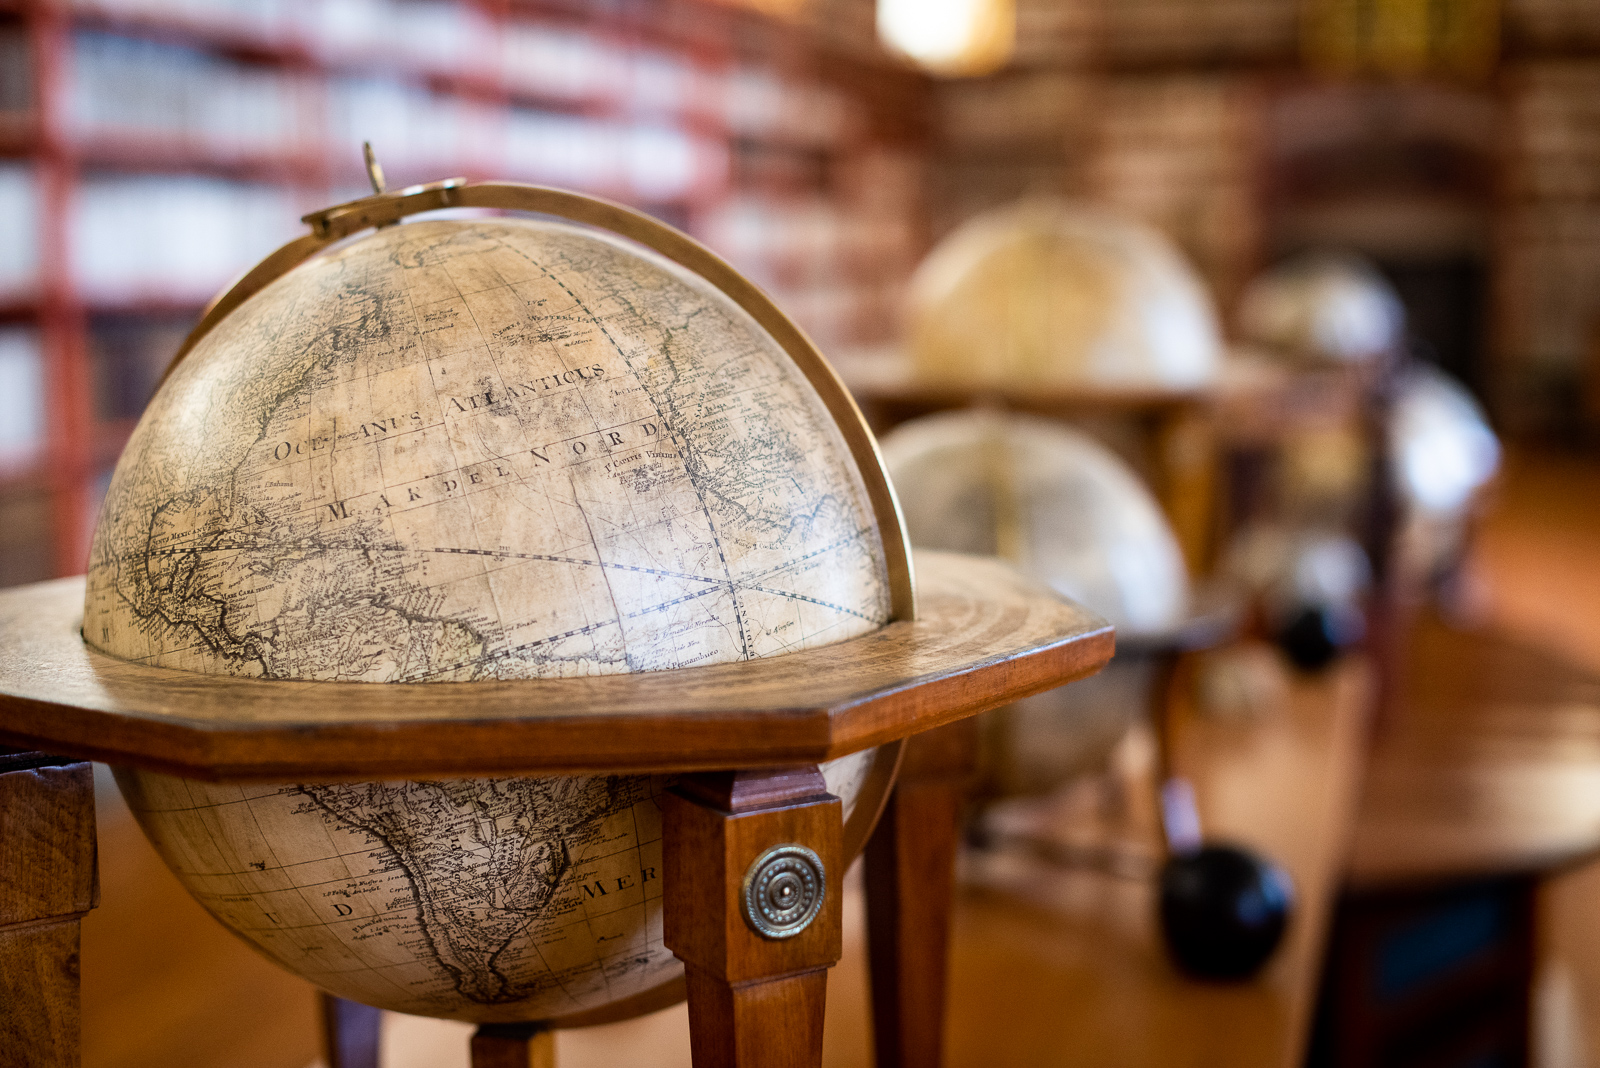 antique globes in the theological hall